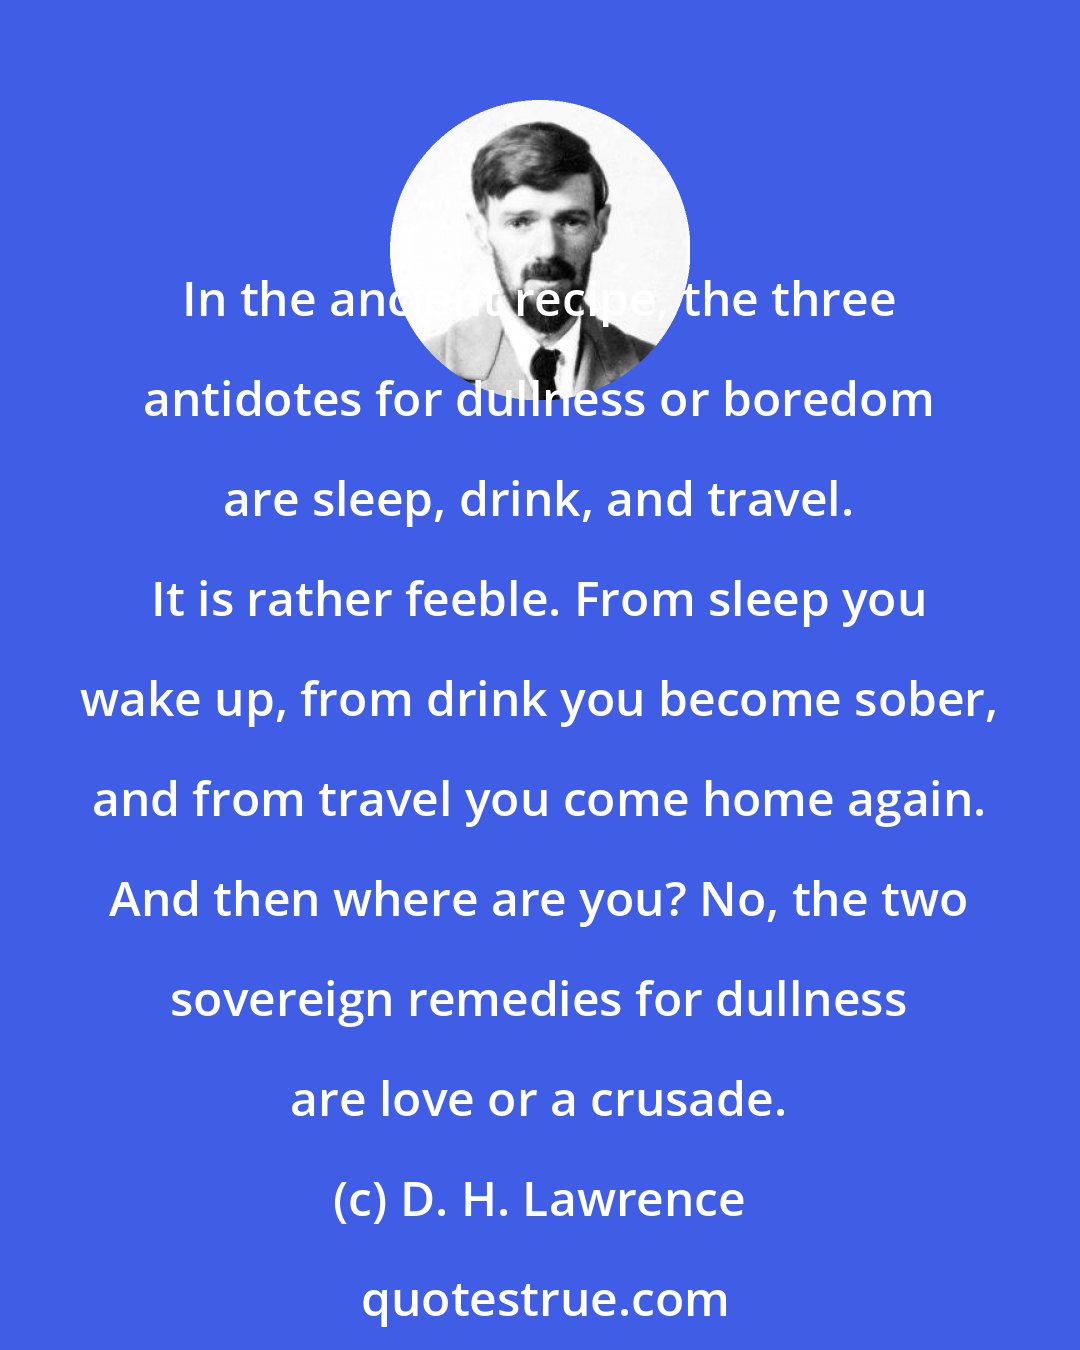 D. H. Lawrence: In the ancient recipe, the three antidotes for dullness or boredom are sleep, drink, and travel. It is rather feeble. From sleep you wake up, from drink you become sober, and from travel you come home again. And then where are you? No, the two sovereign remedies for dullness are love or a crusade.